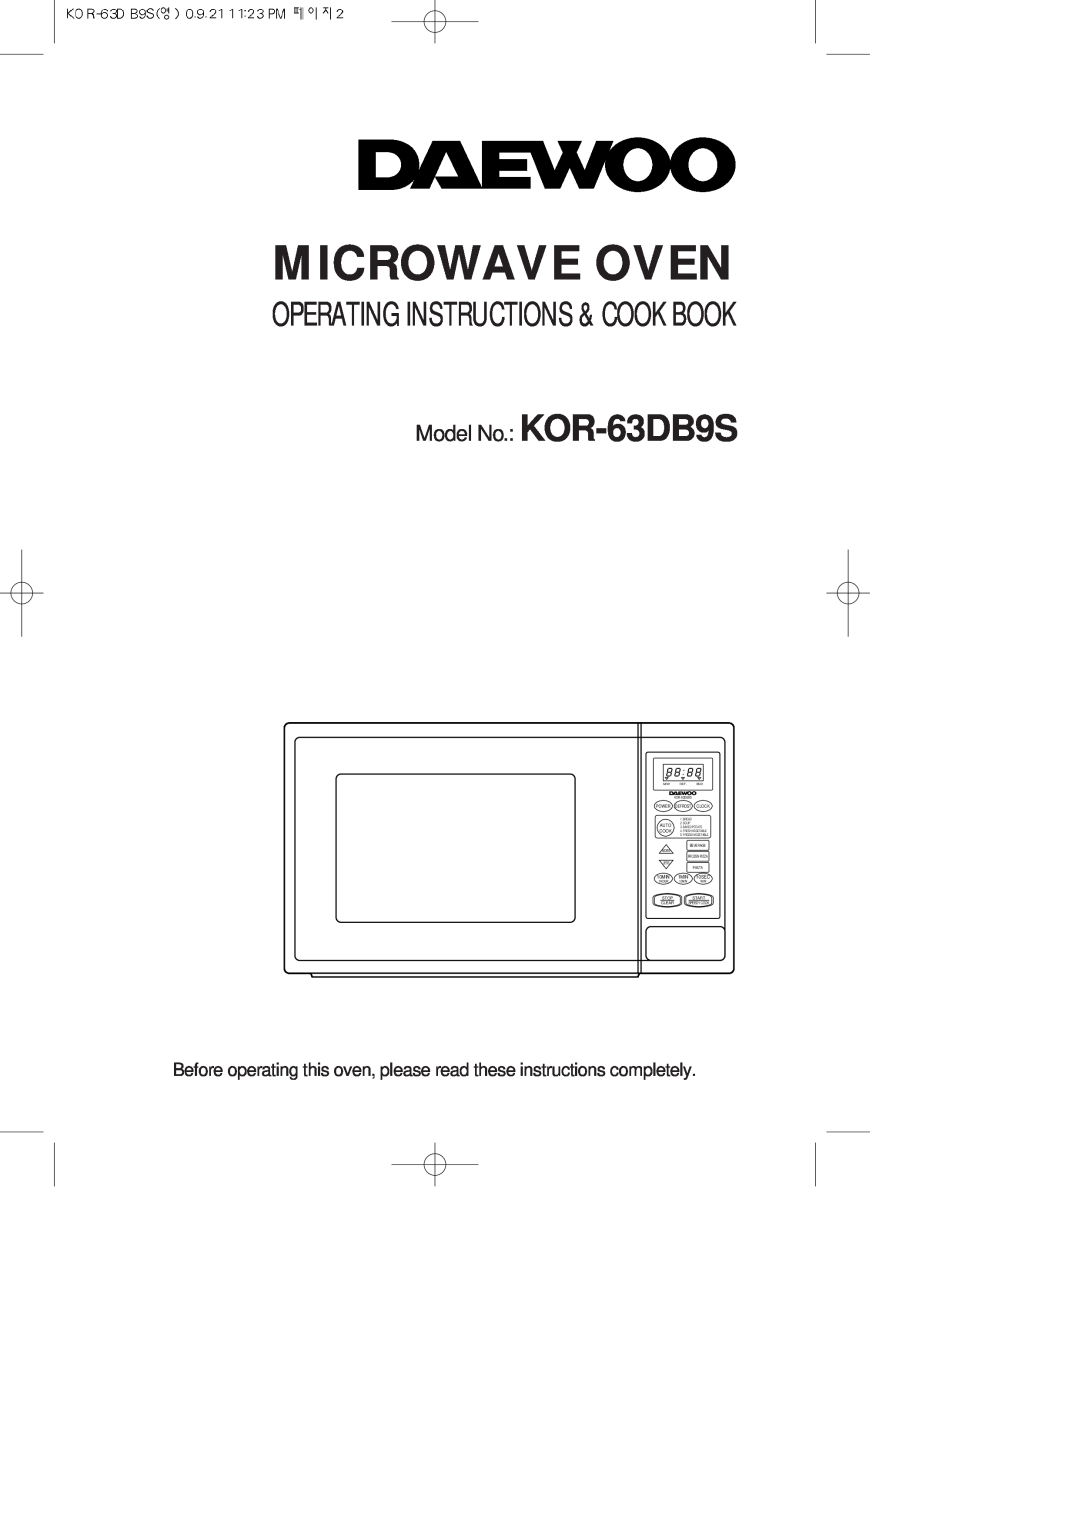 Daewoo manual Microwave Oven, Operating Instructions & Cook Book, Model No. KOR-63DB9S, 10MIN 1MIN 10SEC, Clear 